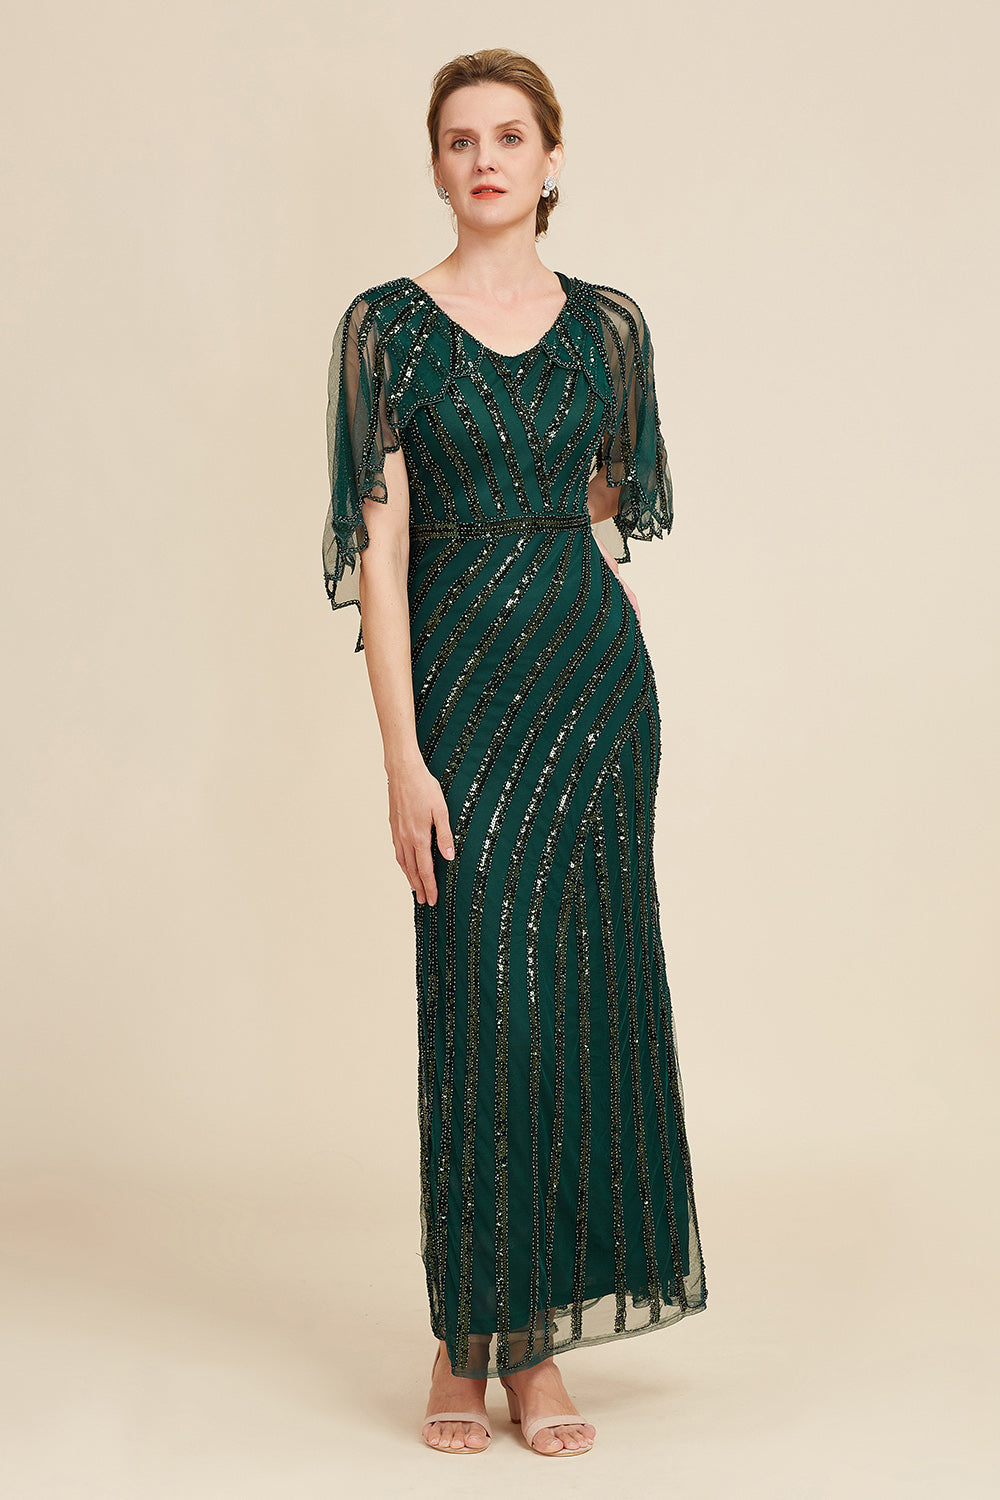 Dark Green Sheath Sequins Round Neck Mother Of Bride Dress with Cape Sleeves